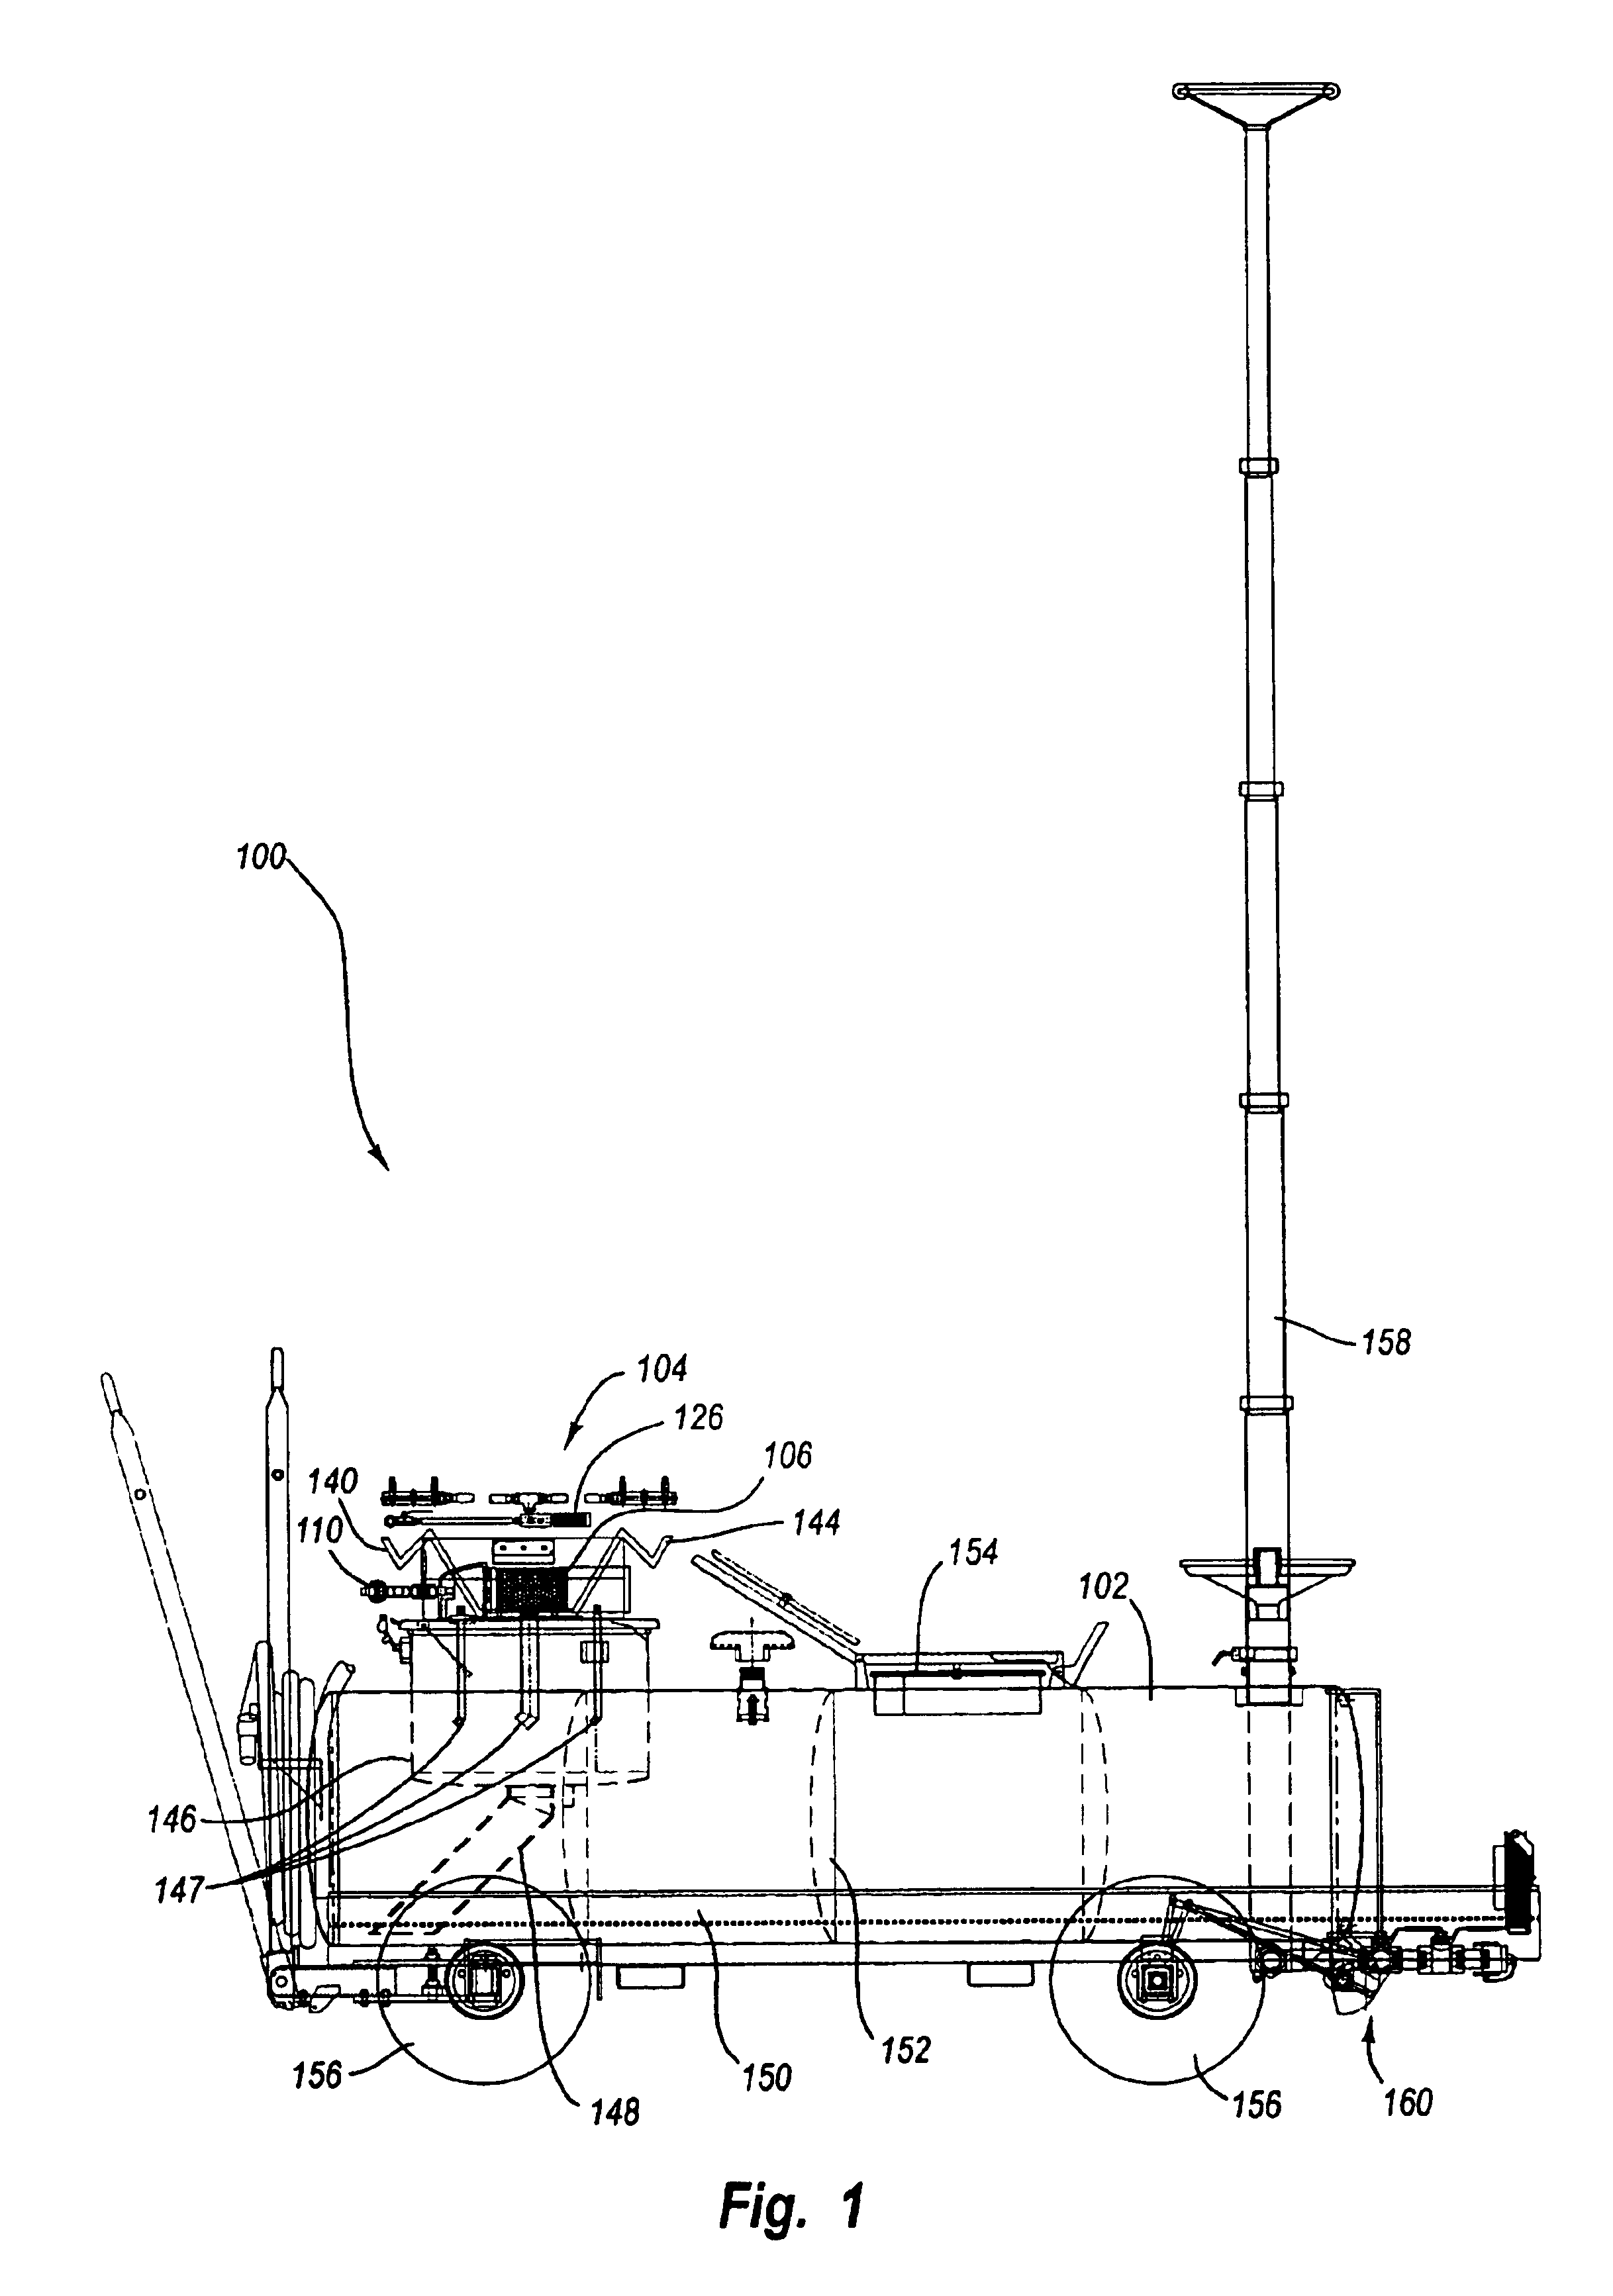 Aircraft defueling system